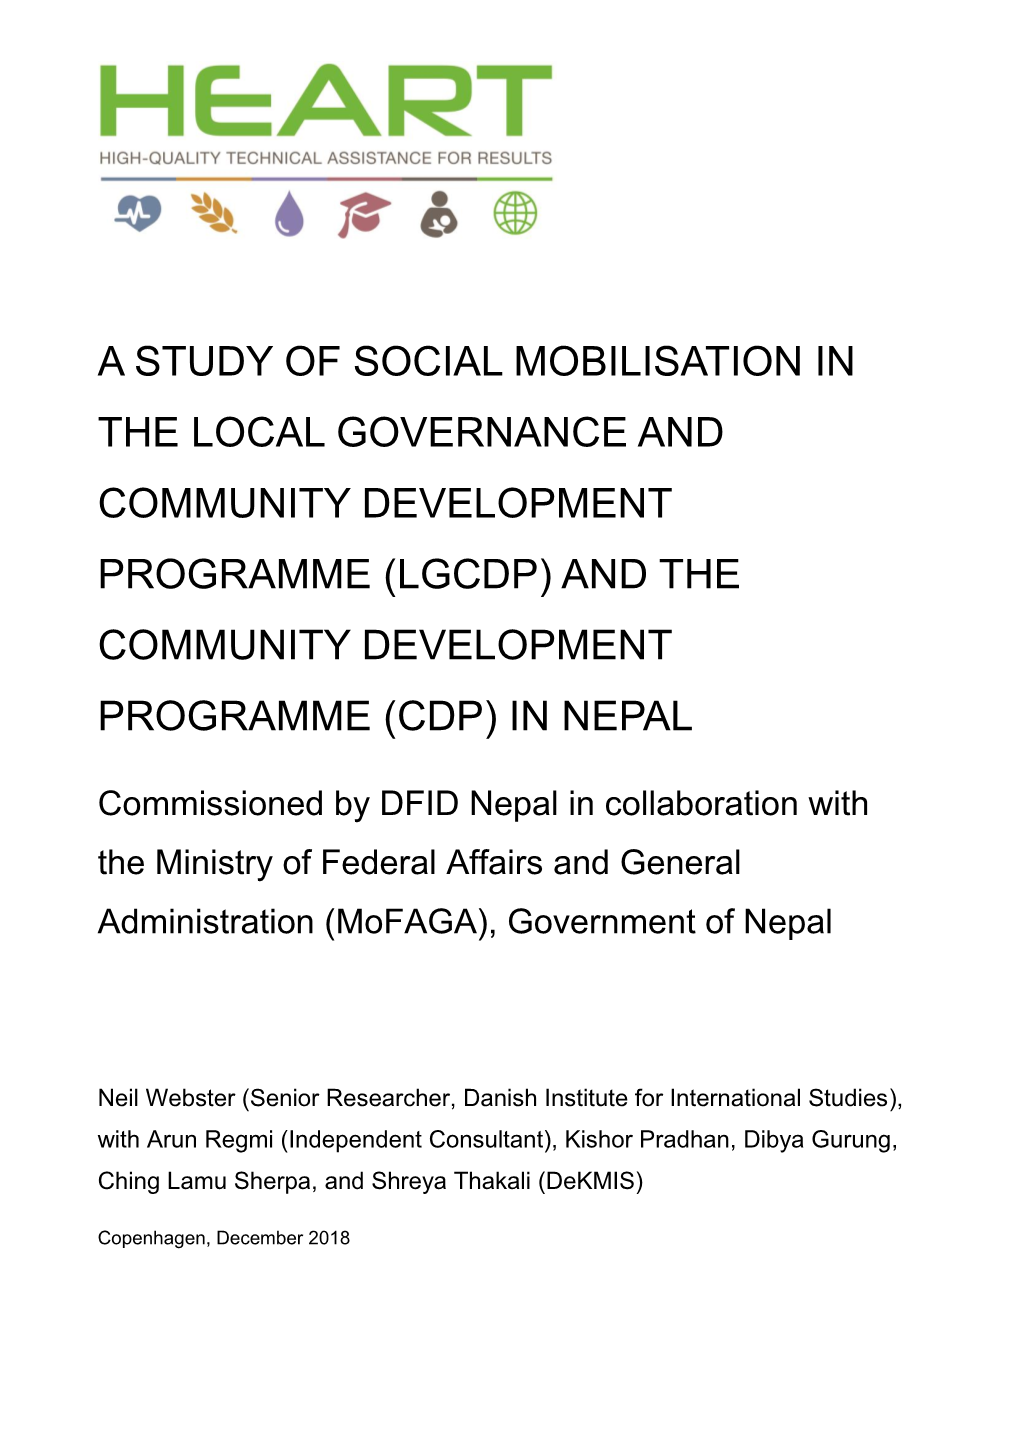 A Study of Social Mobilisation in the Local Governance and Community Development Programme (Lgcdp) and the Community Development Programme (Cdp) in Nepal